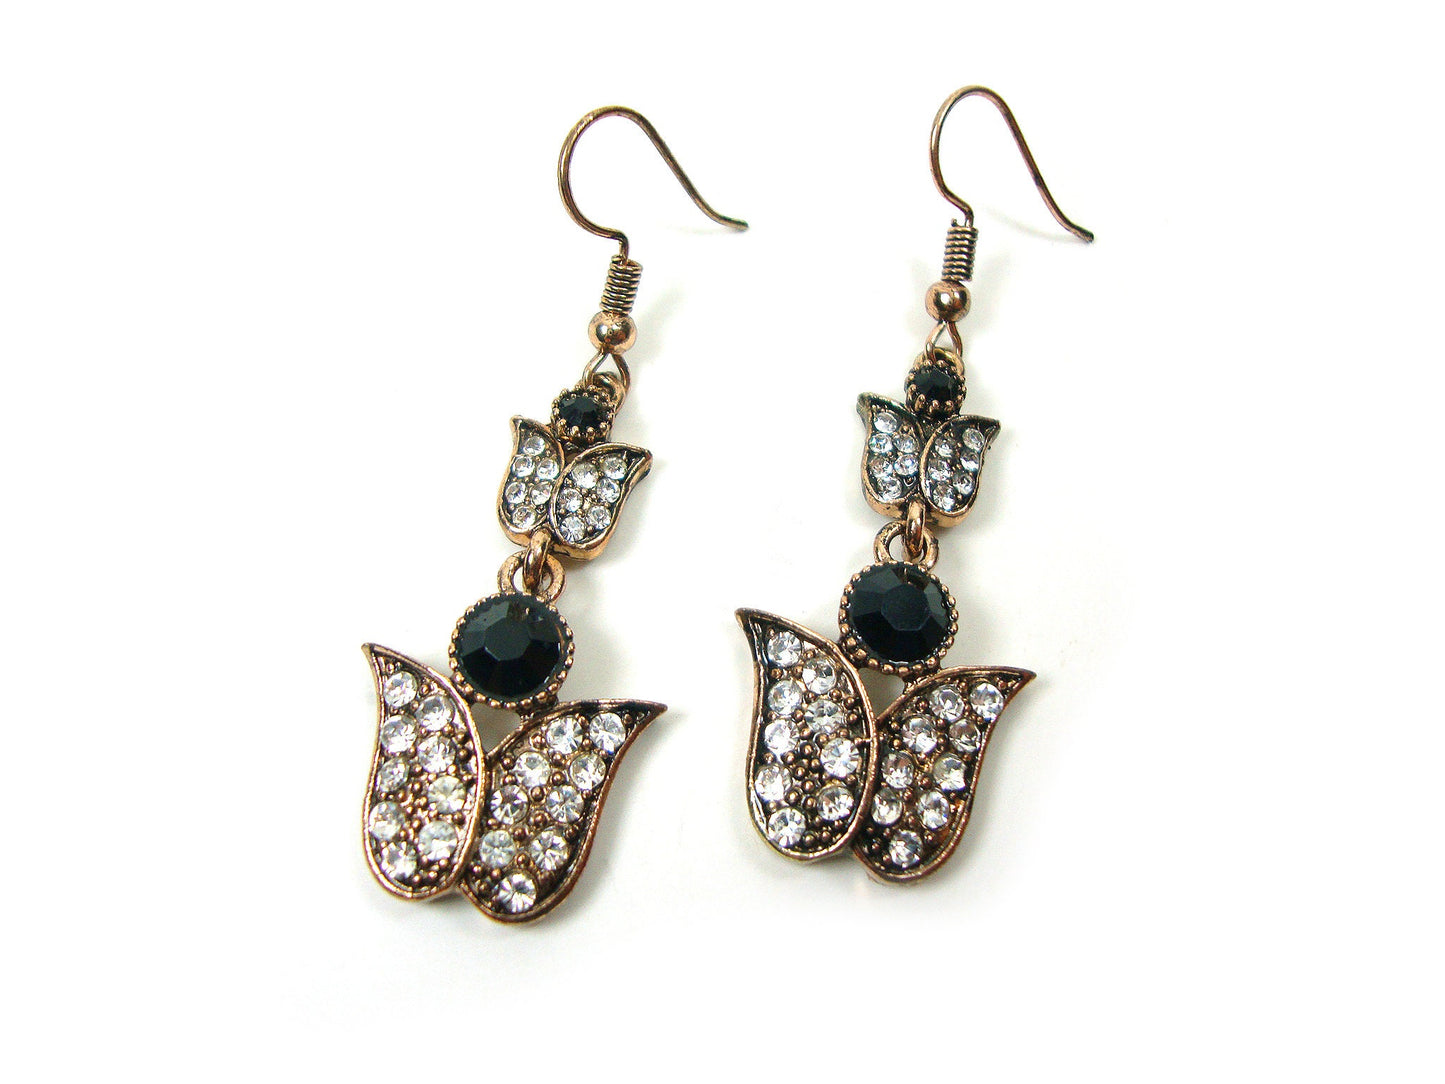 Byzantine Earrings, Antique Style Black-White Crystal Stones Dangle Earrings, Ethnic Antique Earrings, Byzantine Traditional Jewels